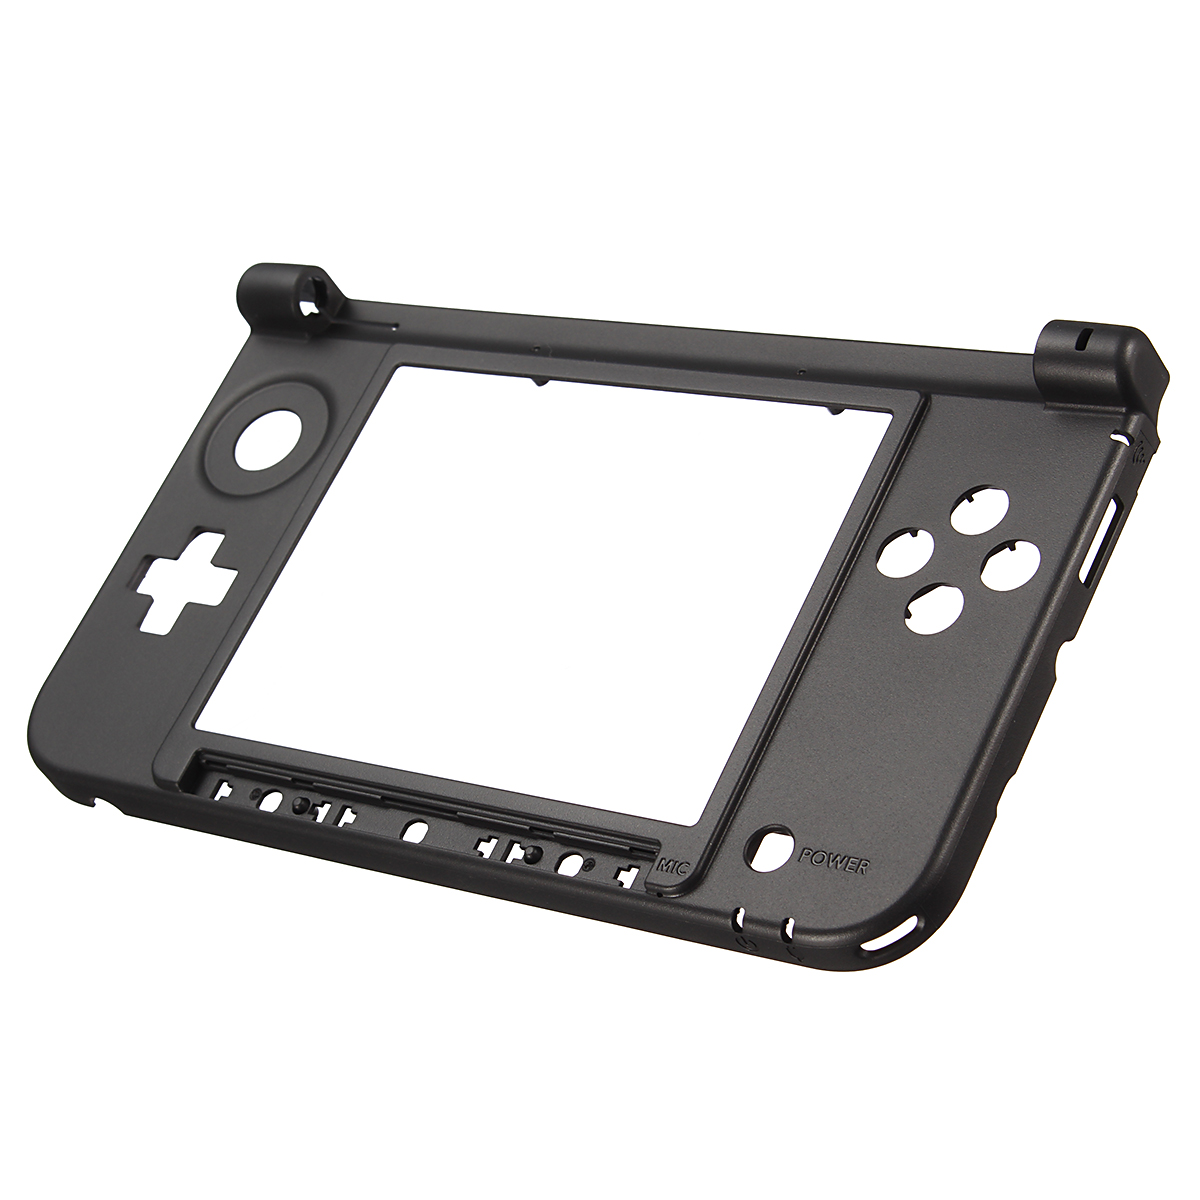 Replacement Bottom Middle Frame Housing Shell Cover Case for Nintendo 3DS XL 3DS LL Game Console 6